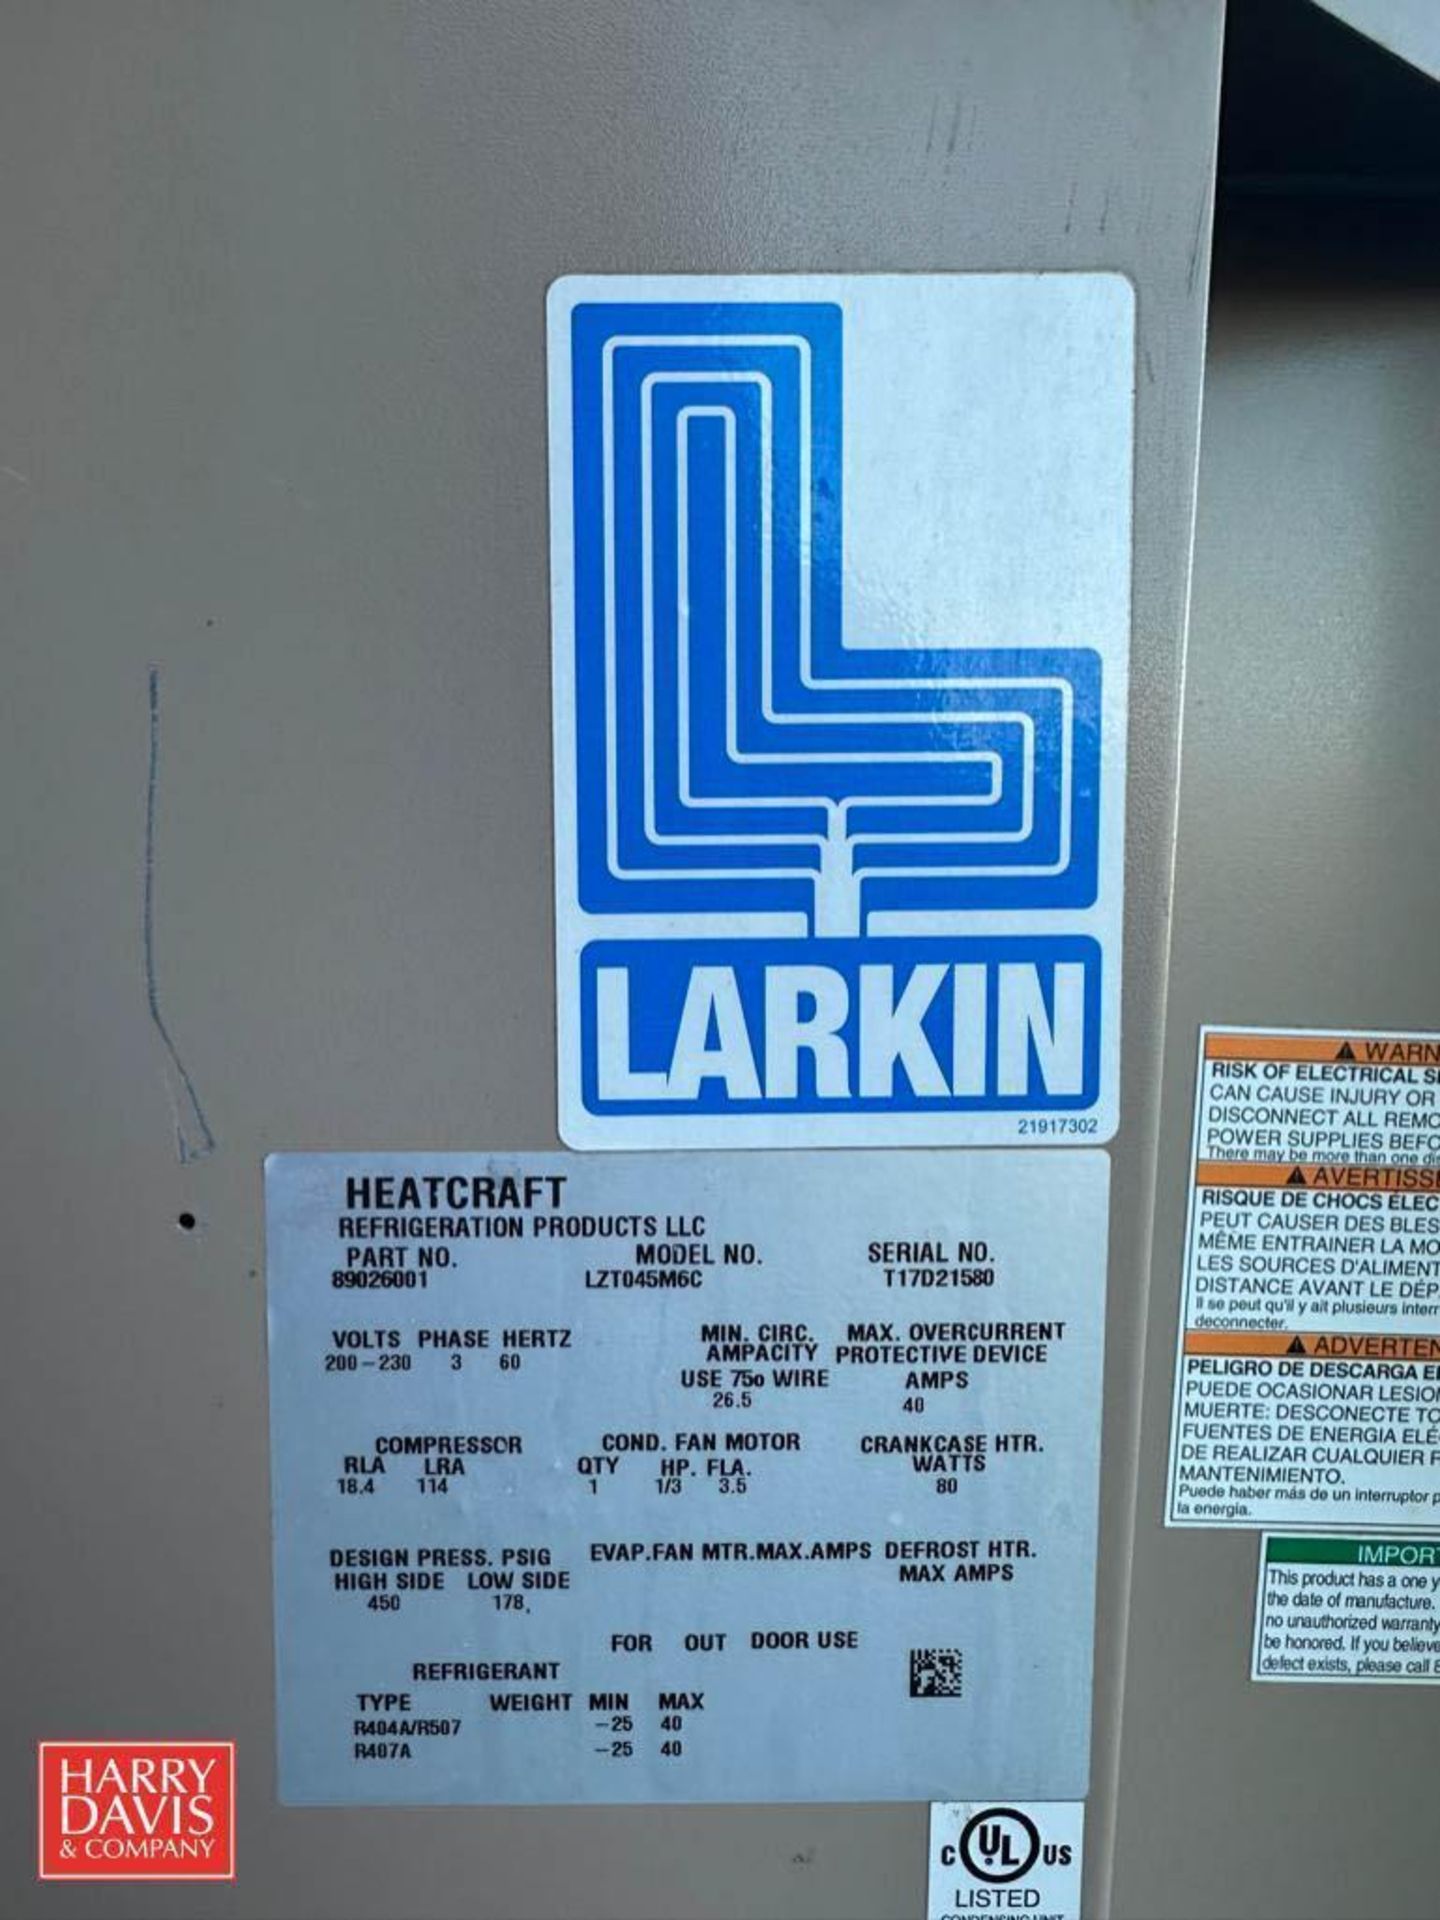 Bohn and Larkin 6-Fan Freon Freezer Blower with Compressor (Located Outside) - Image 4 of 4